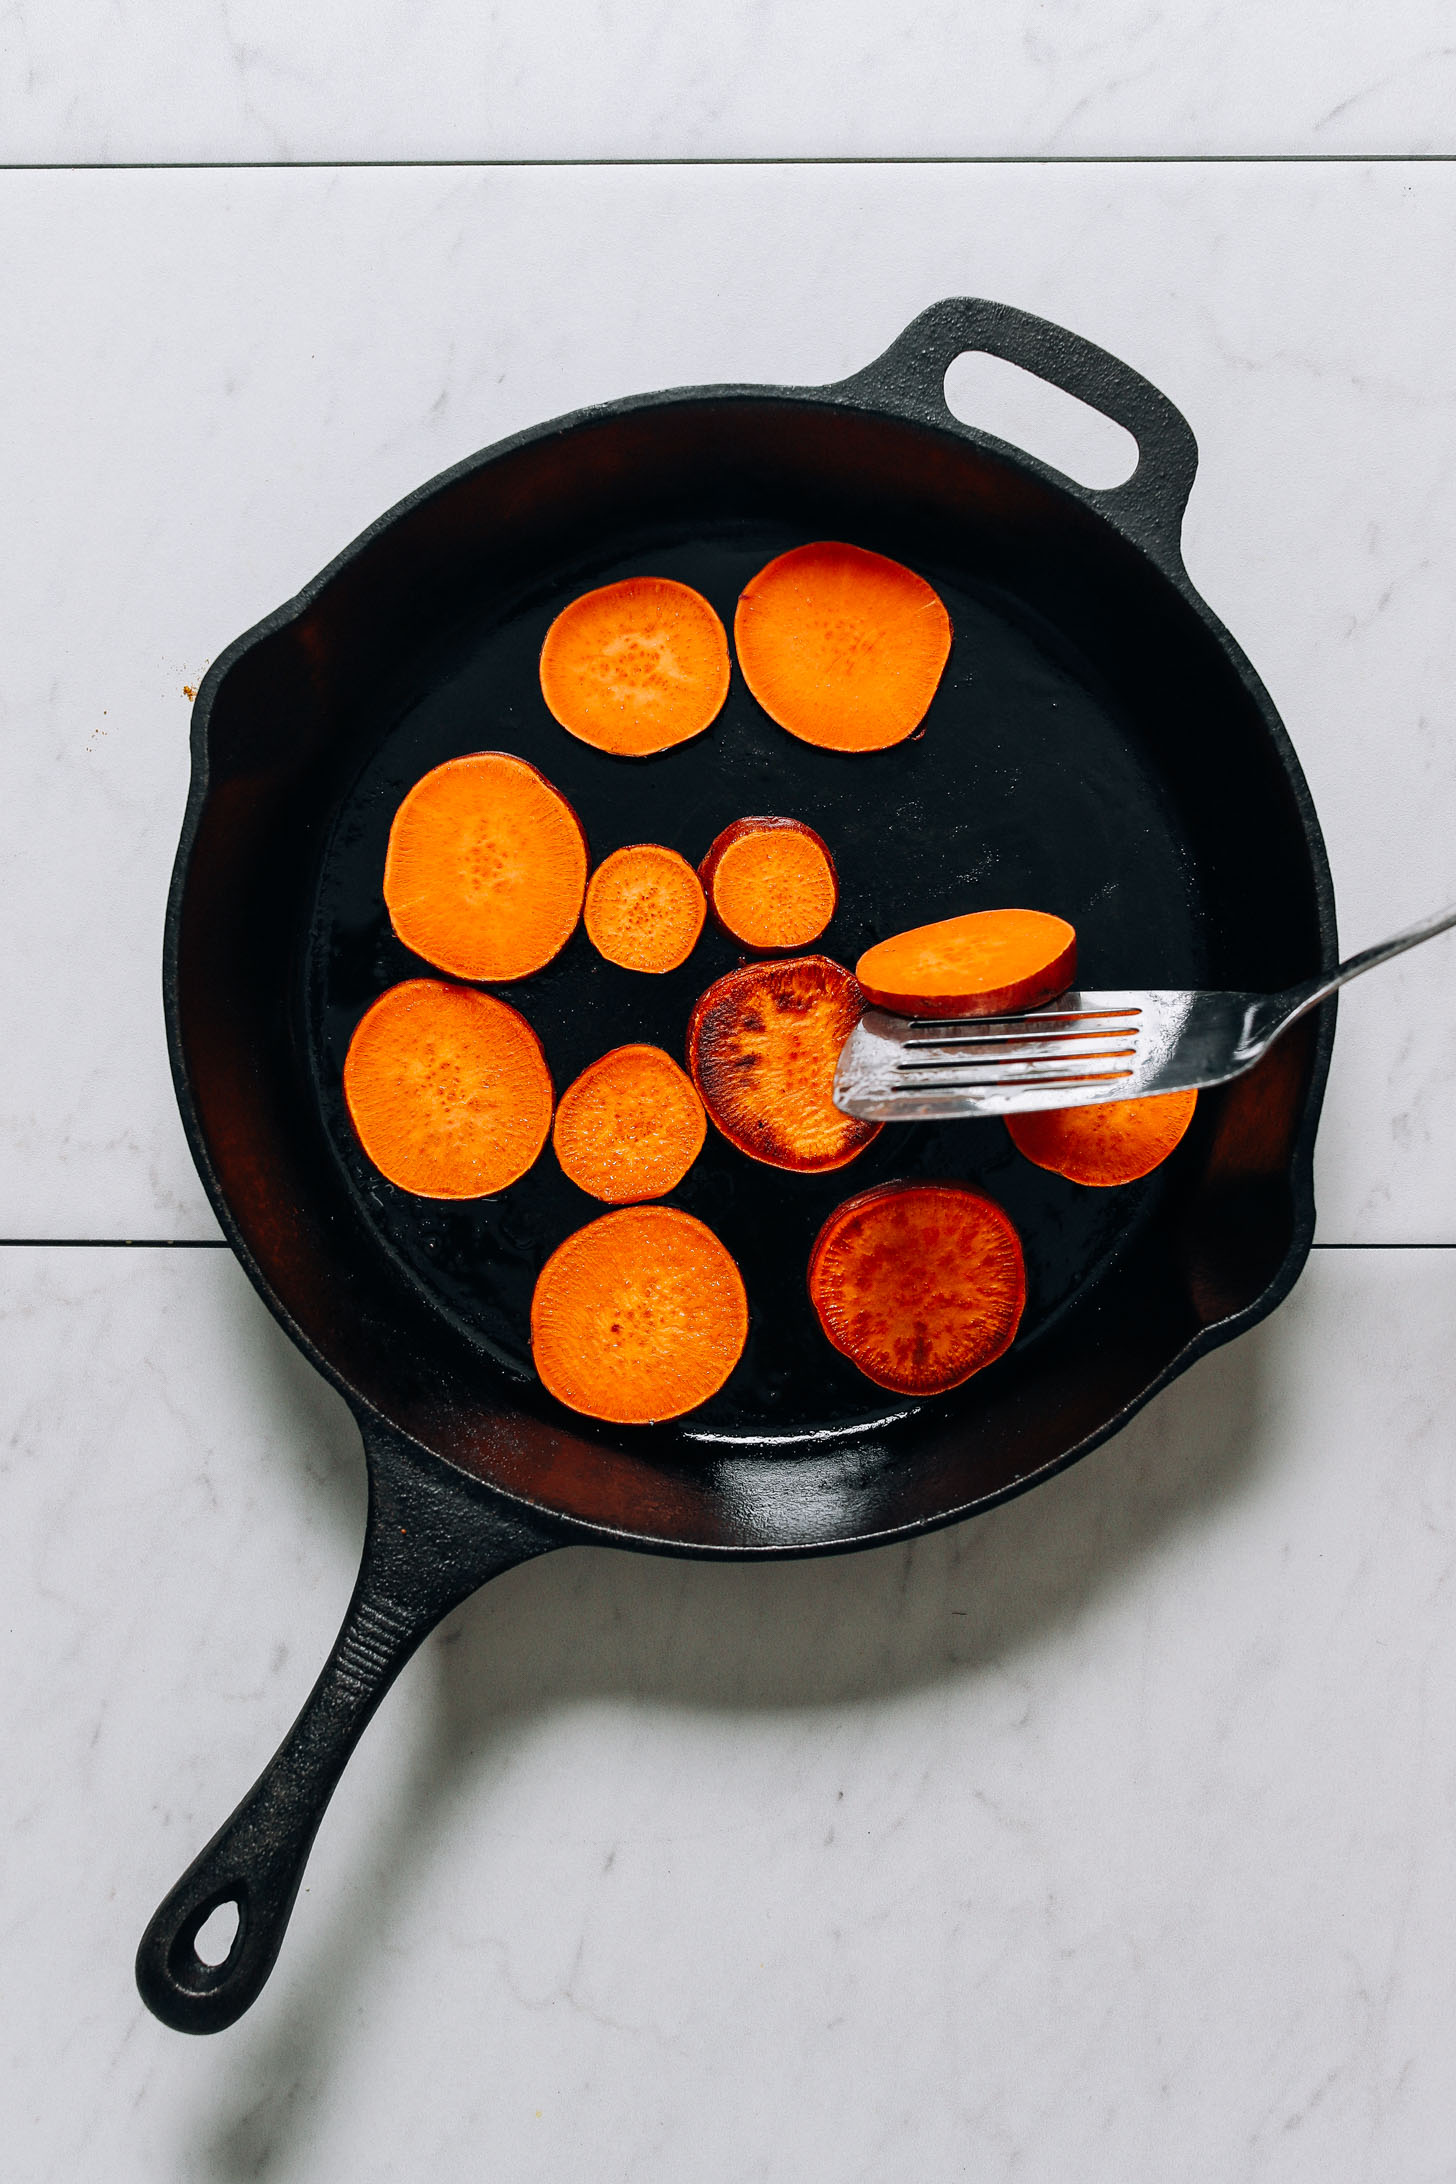 Cooking sweet potatoes in a cast iron skillet